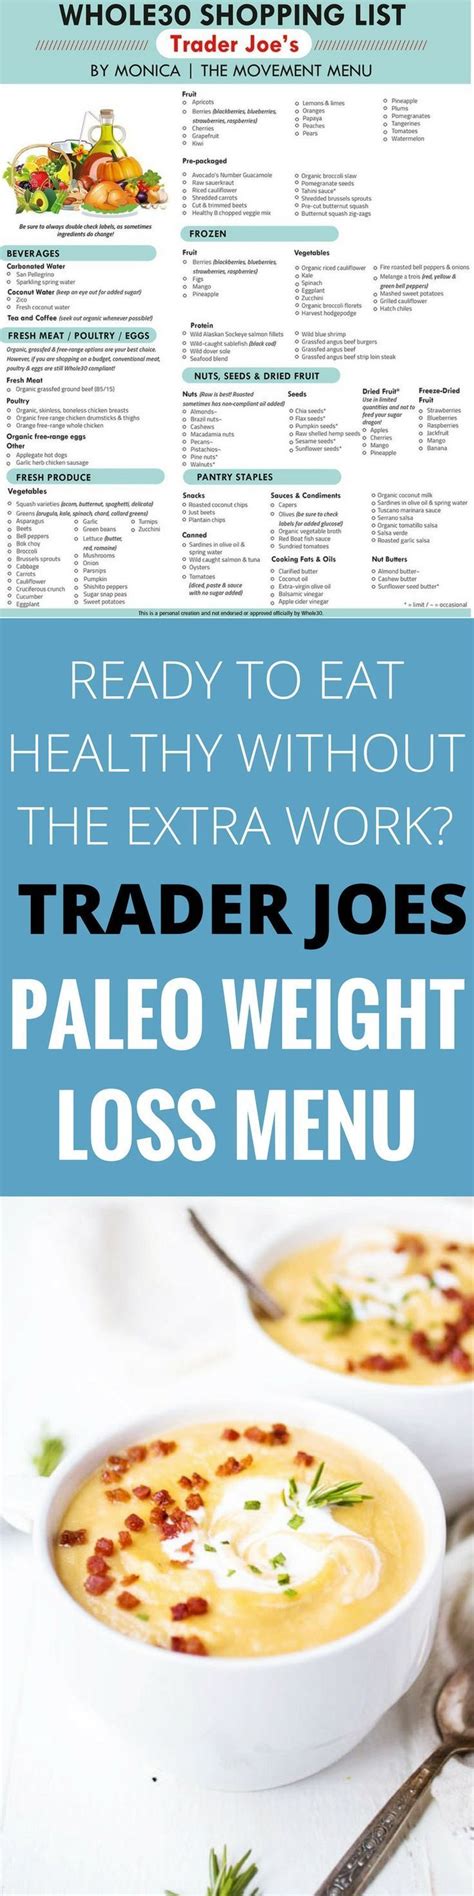 trader joes shopping list   buy healthy paleo meal